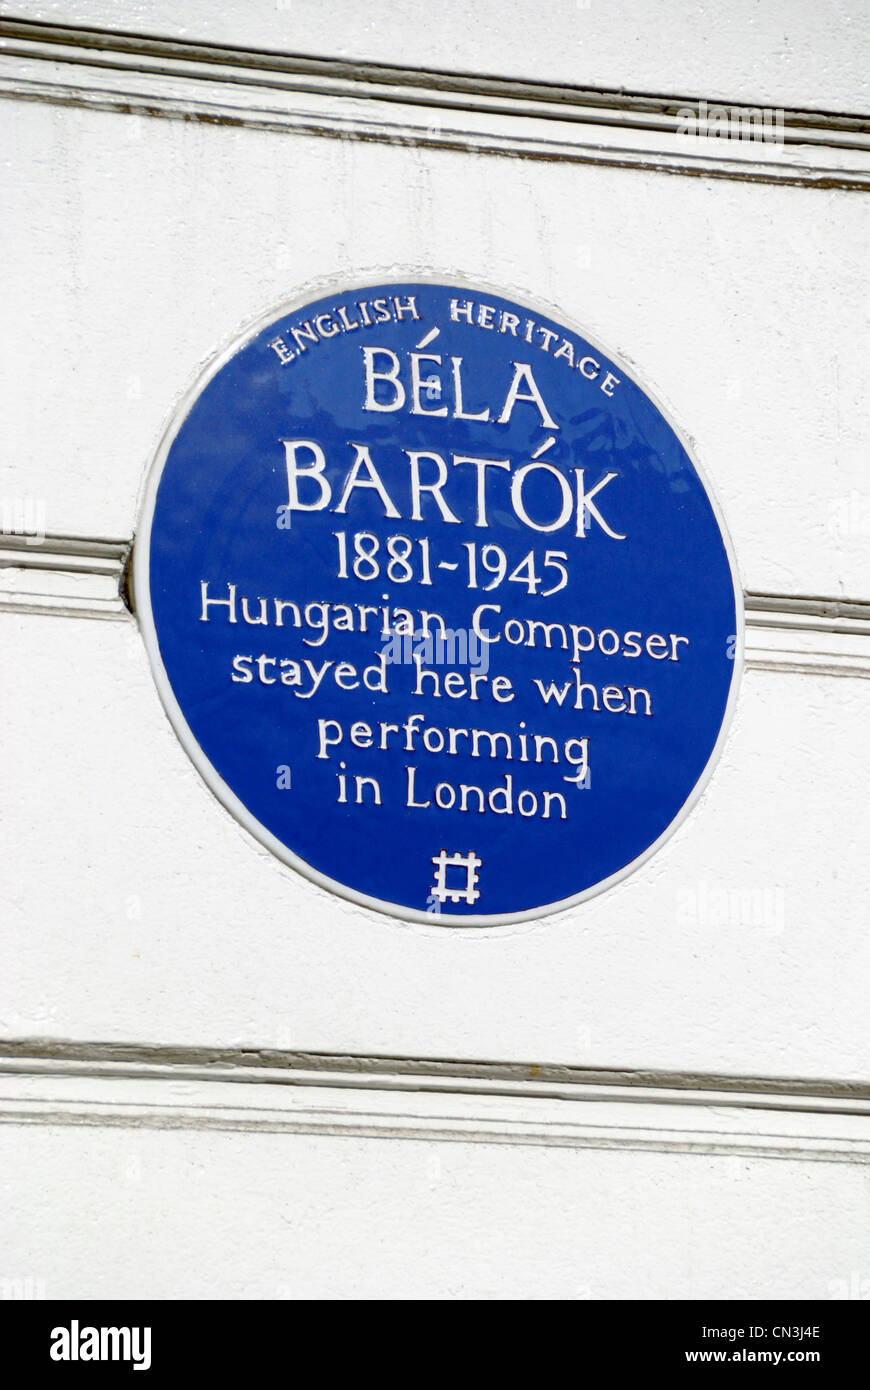 English Heritage blue plaque marking the house where Bela Bartok stayed when performing in London. Stock Photo